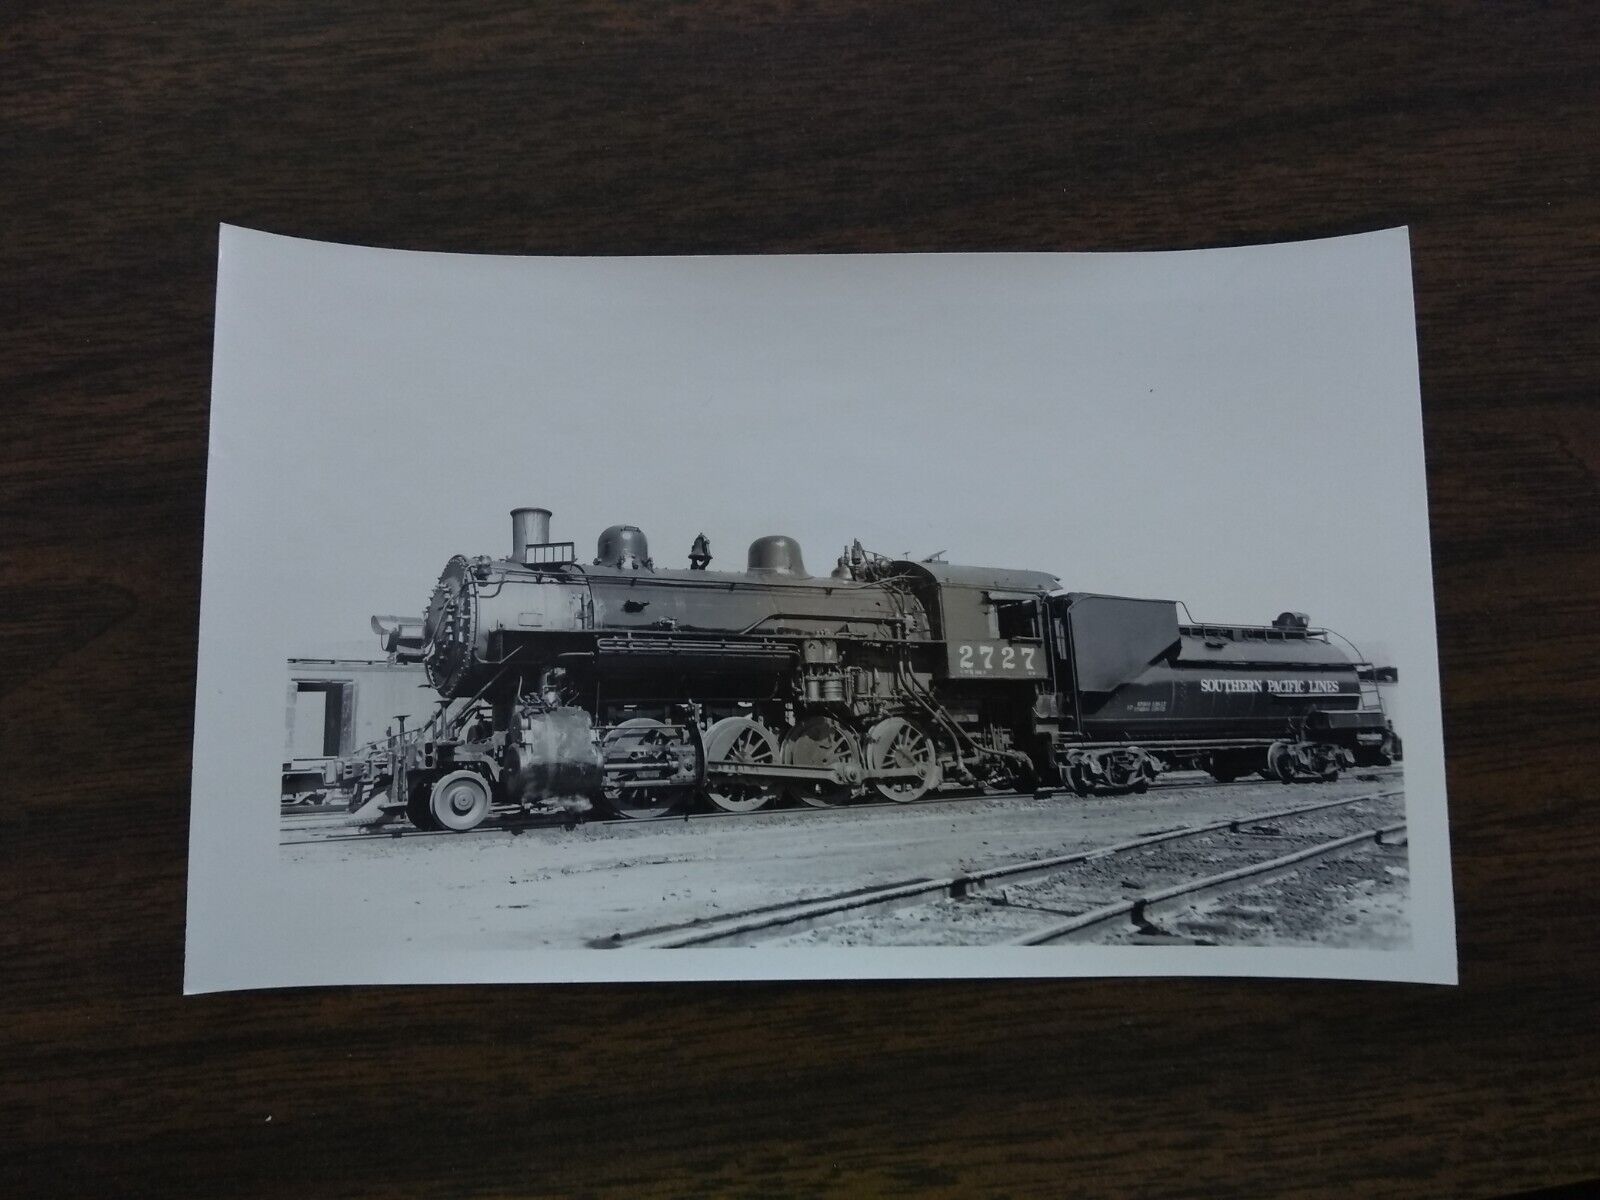 ST26 Steam Train Photo Vintage SP Southern Pacific, ENGINE 2727, 1940